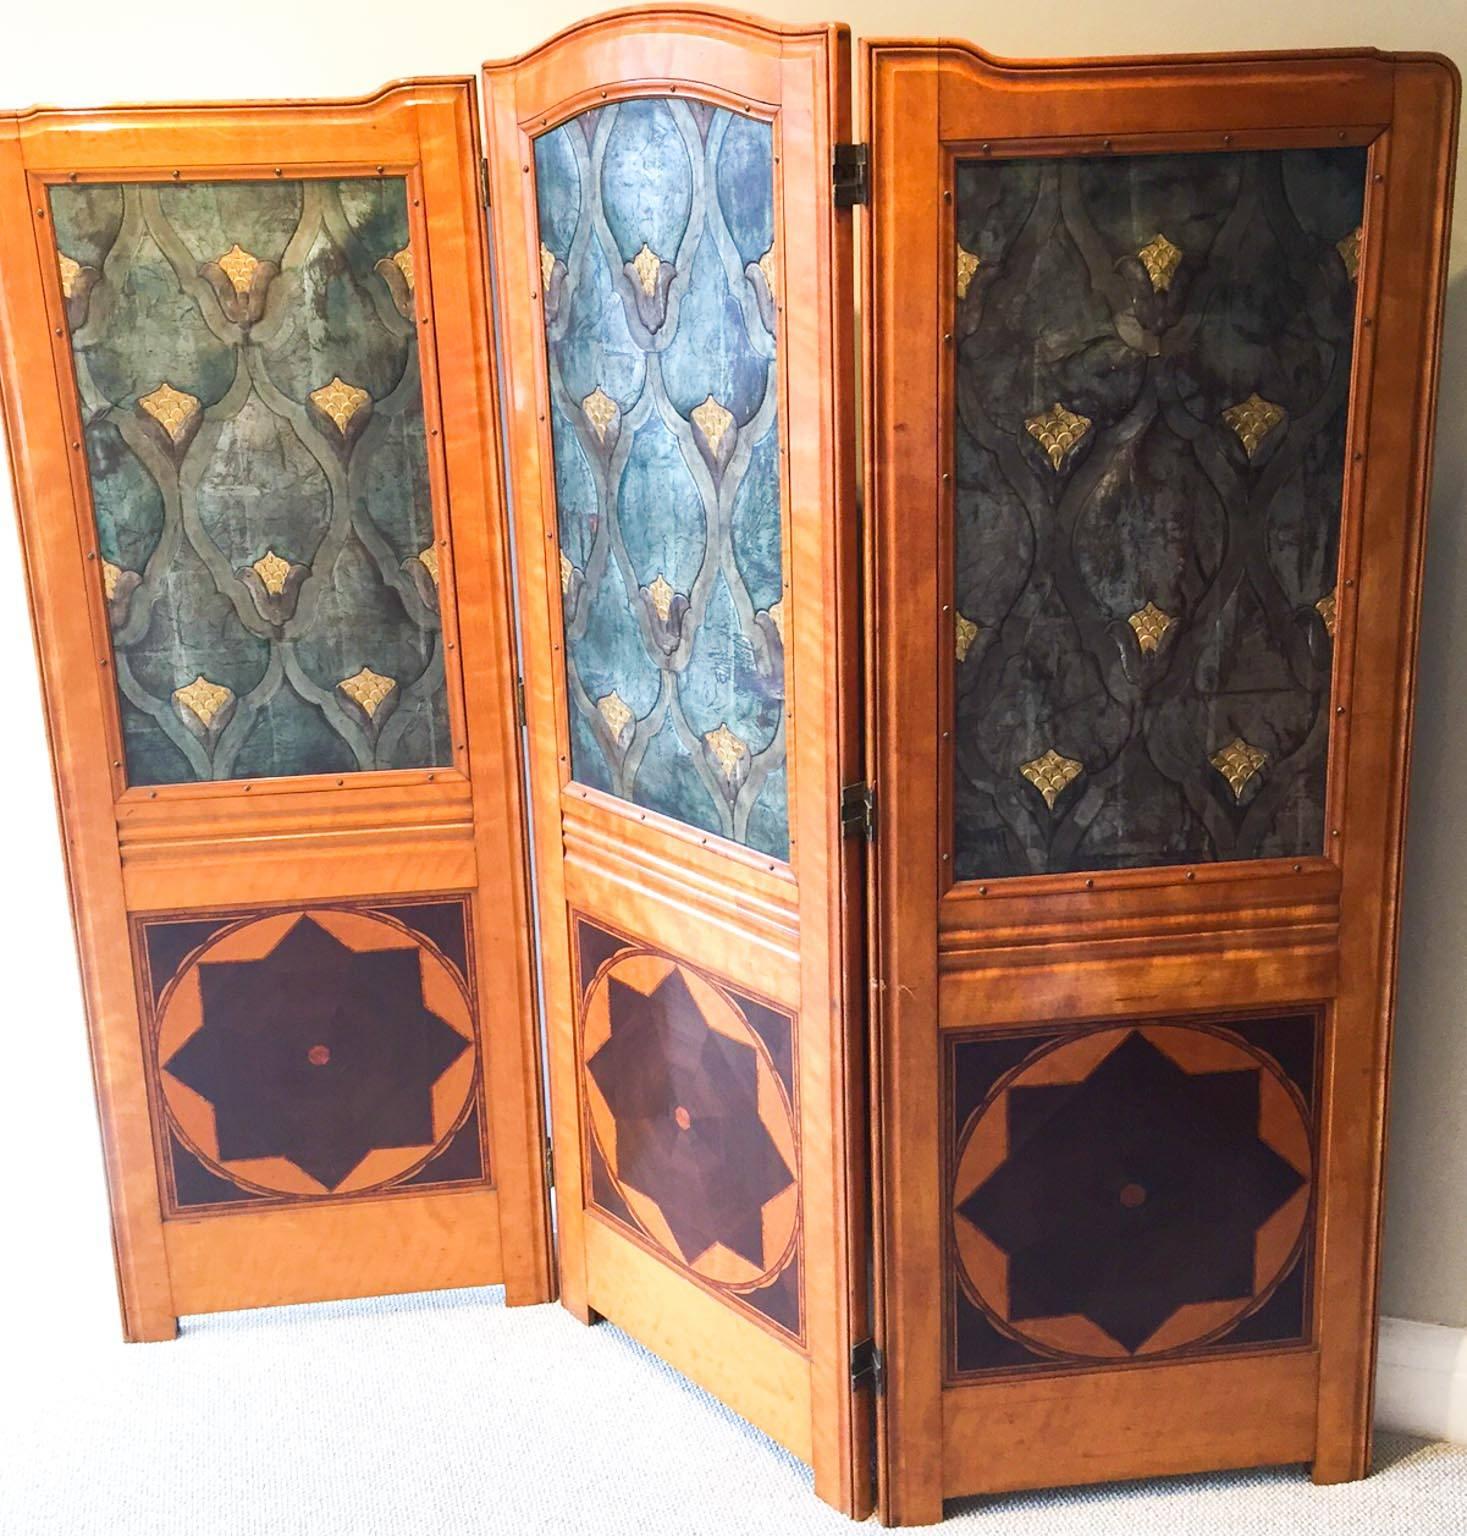 A simply stunning Art Nouveau three-fold dressing screen. The attractive satinwood frame with its arched centre panel has a wonderful color and design. The leather panels are all held firm with a screwed inner molding. The screen is held together